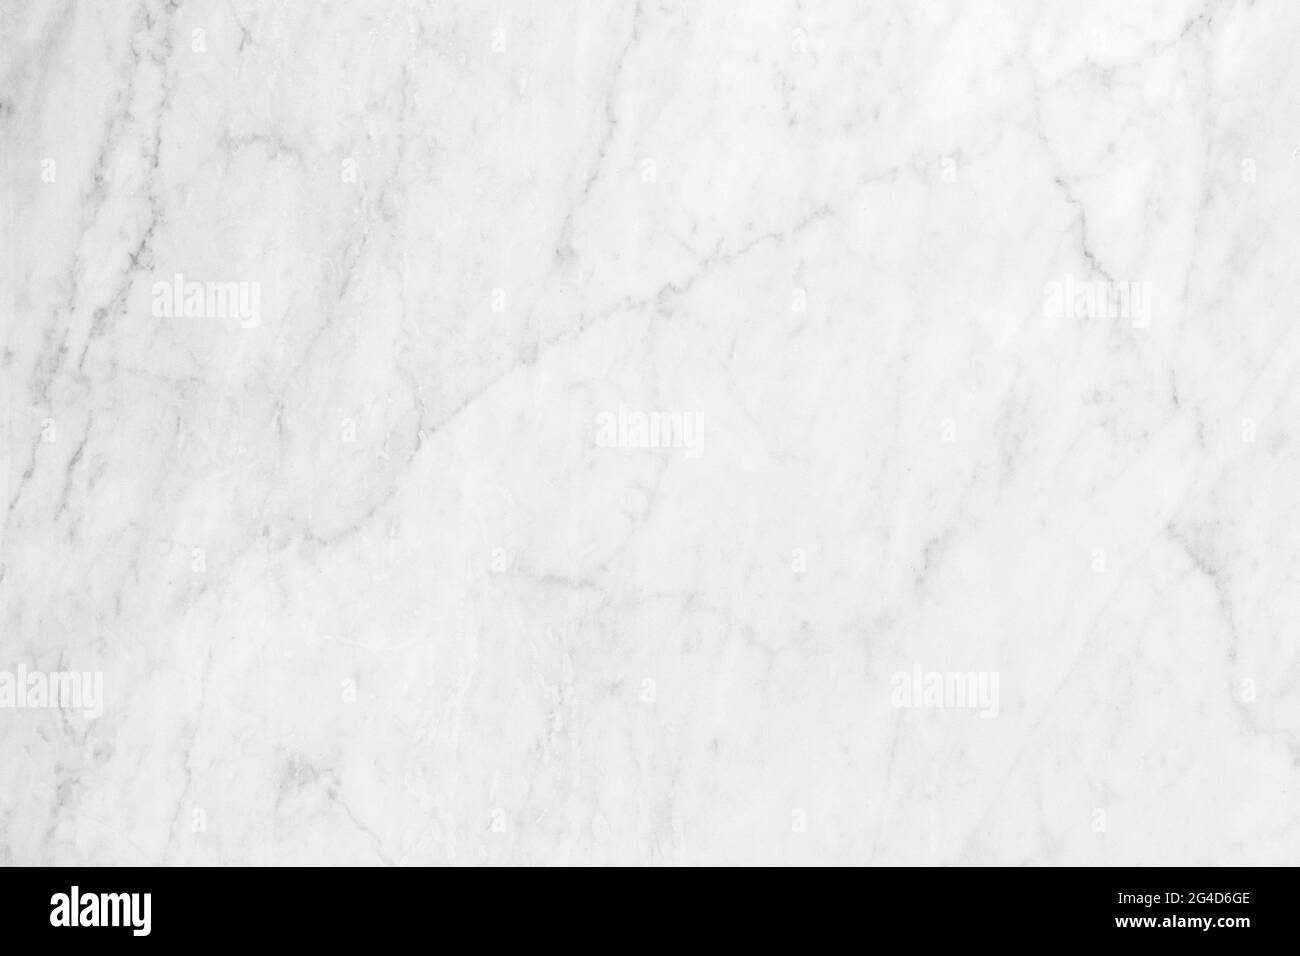 White marble background or texture and copy space, horizontal shape Stock Photo